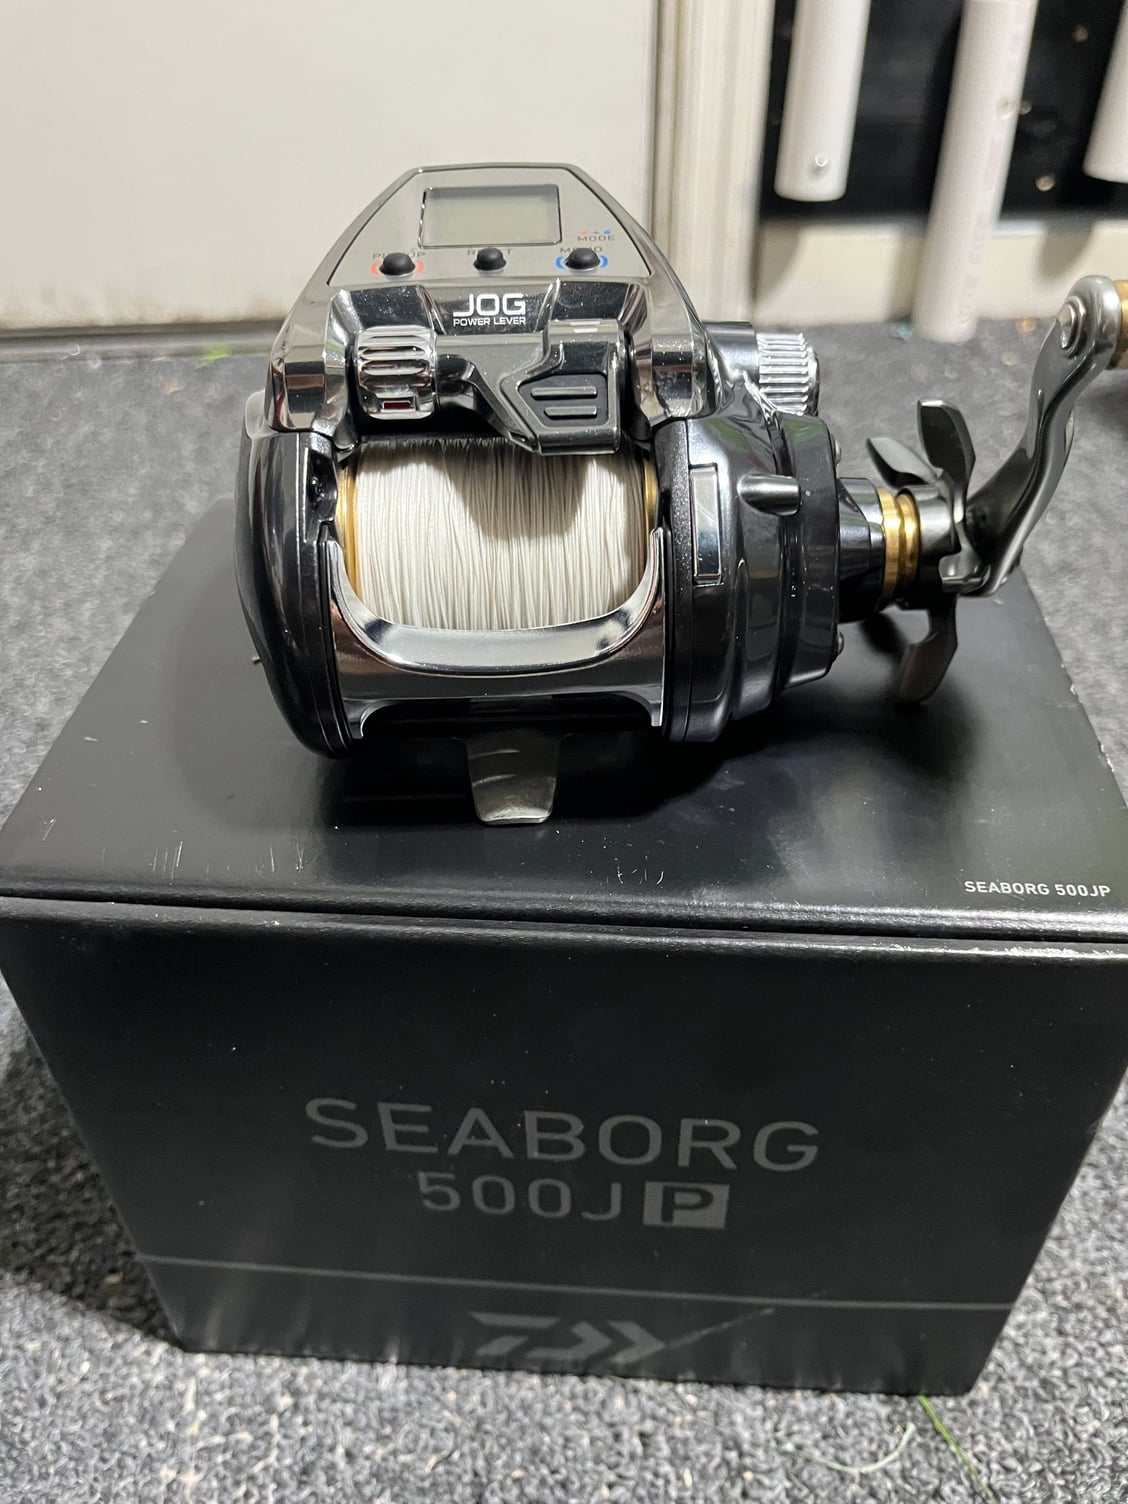 Daiwa Seaborg Jp For Sale English The Hull Truth Boating And